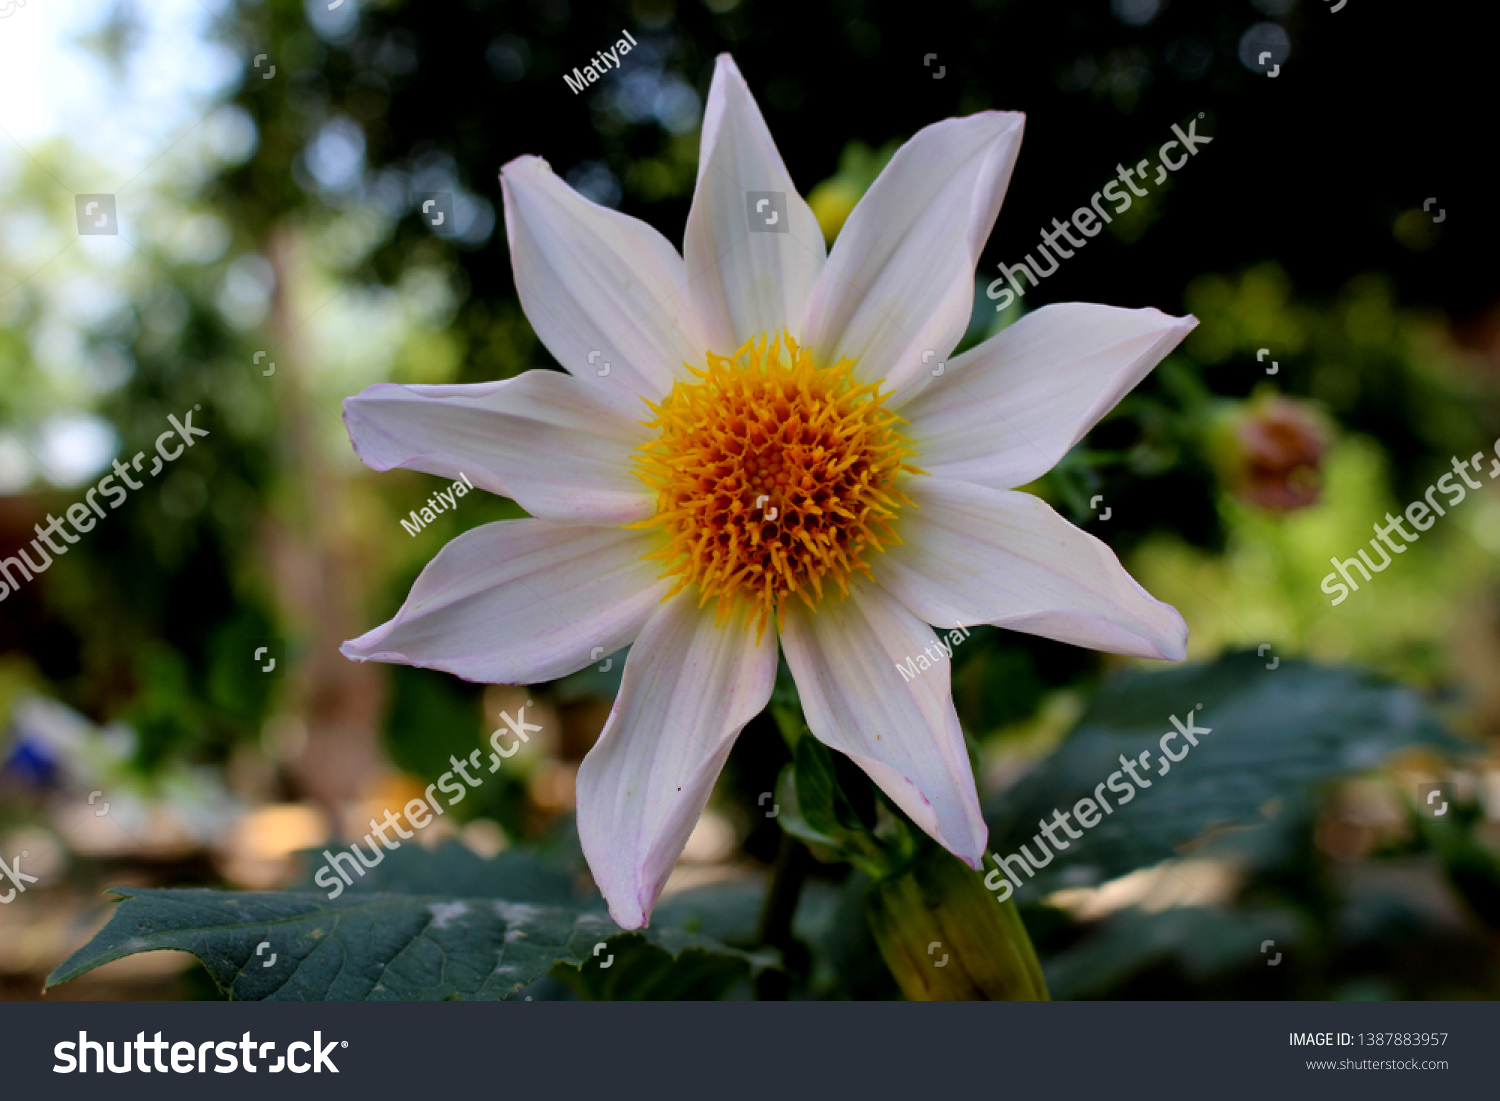 beautiful 9 petal dahlia white flower with yellow pollen and butterfly is on flower along with bee extracting flower juice, mid shot, right shot, center shot, #1387883957